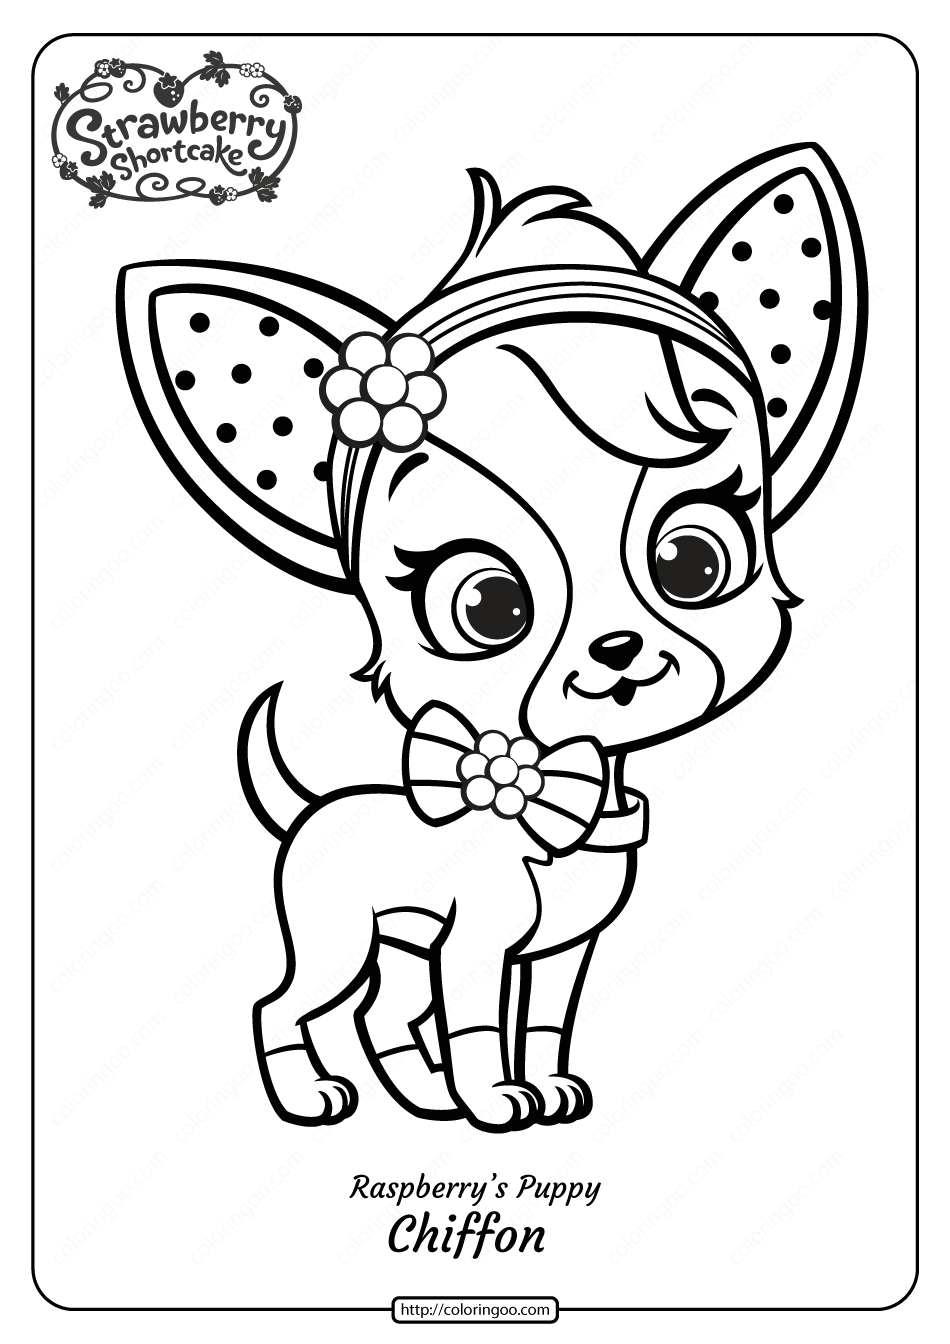 Printable Raspberry’s Puppy Chiffon Coloring Page